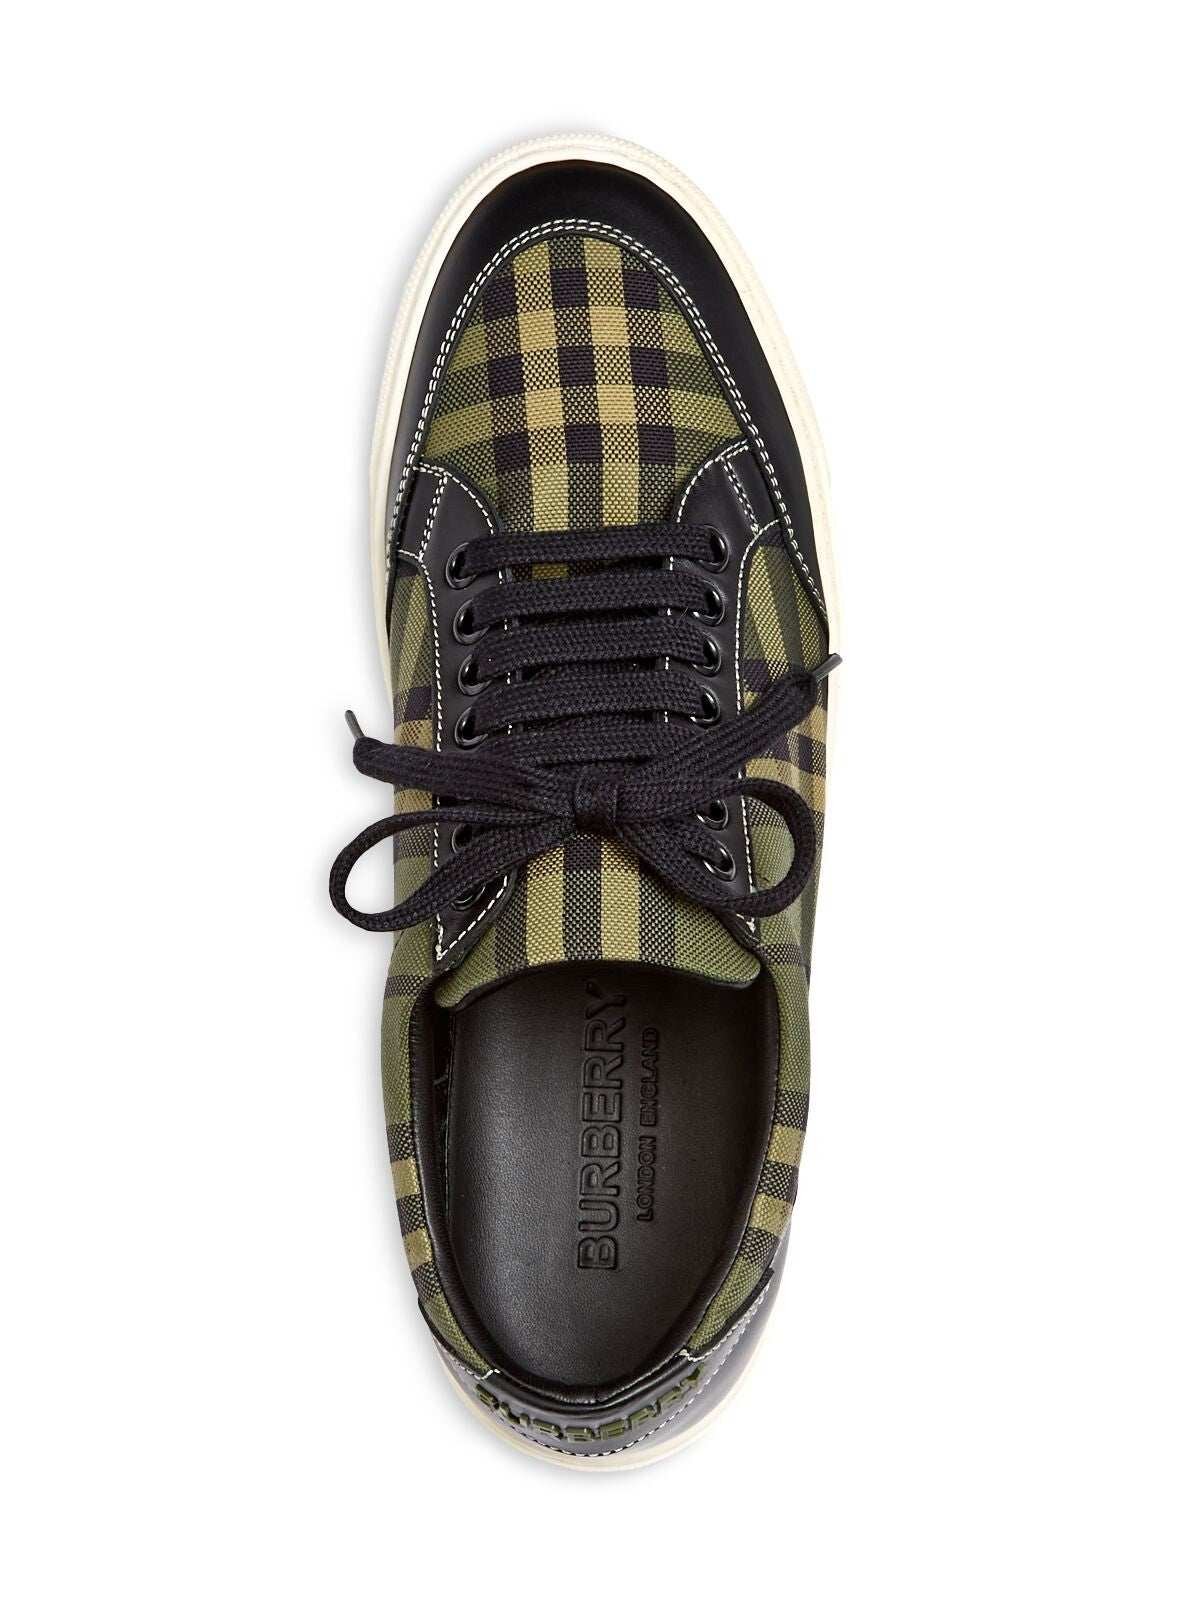 BURBERRY Womens Green Plaid Comfort Salmond Round Toe Platform Lace-Up Athletic Sneakers Shoes